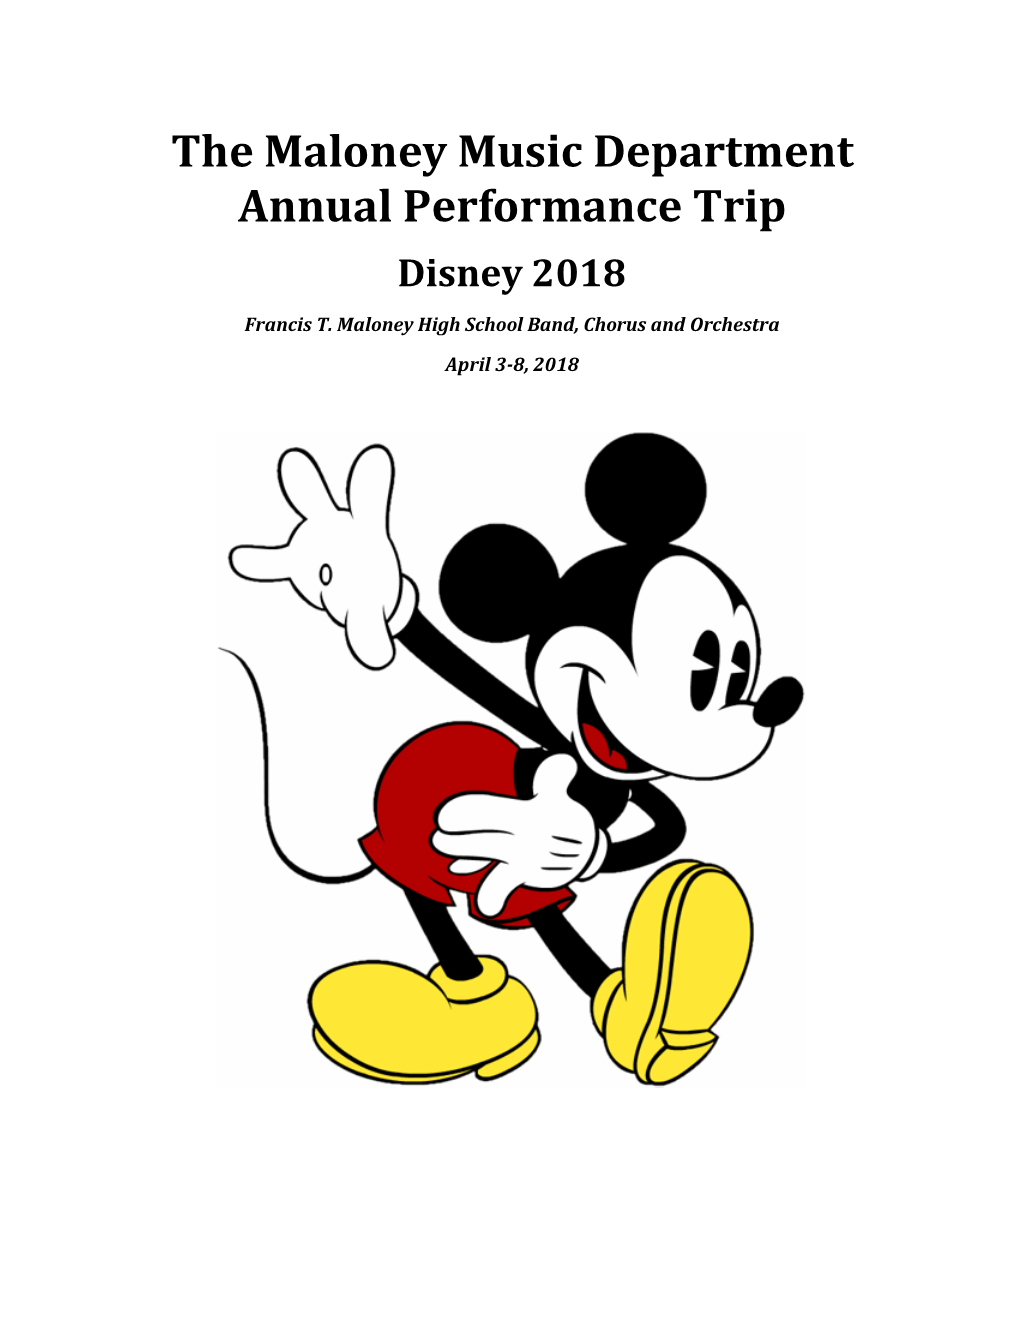 The Maloney Music Department Annual Performance Trip Disney 2018